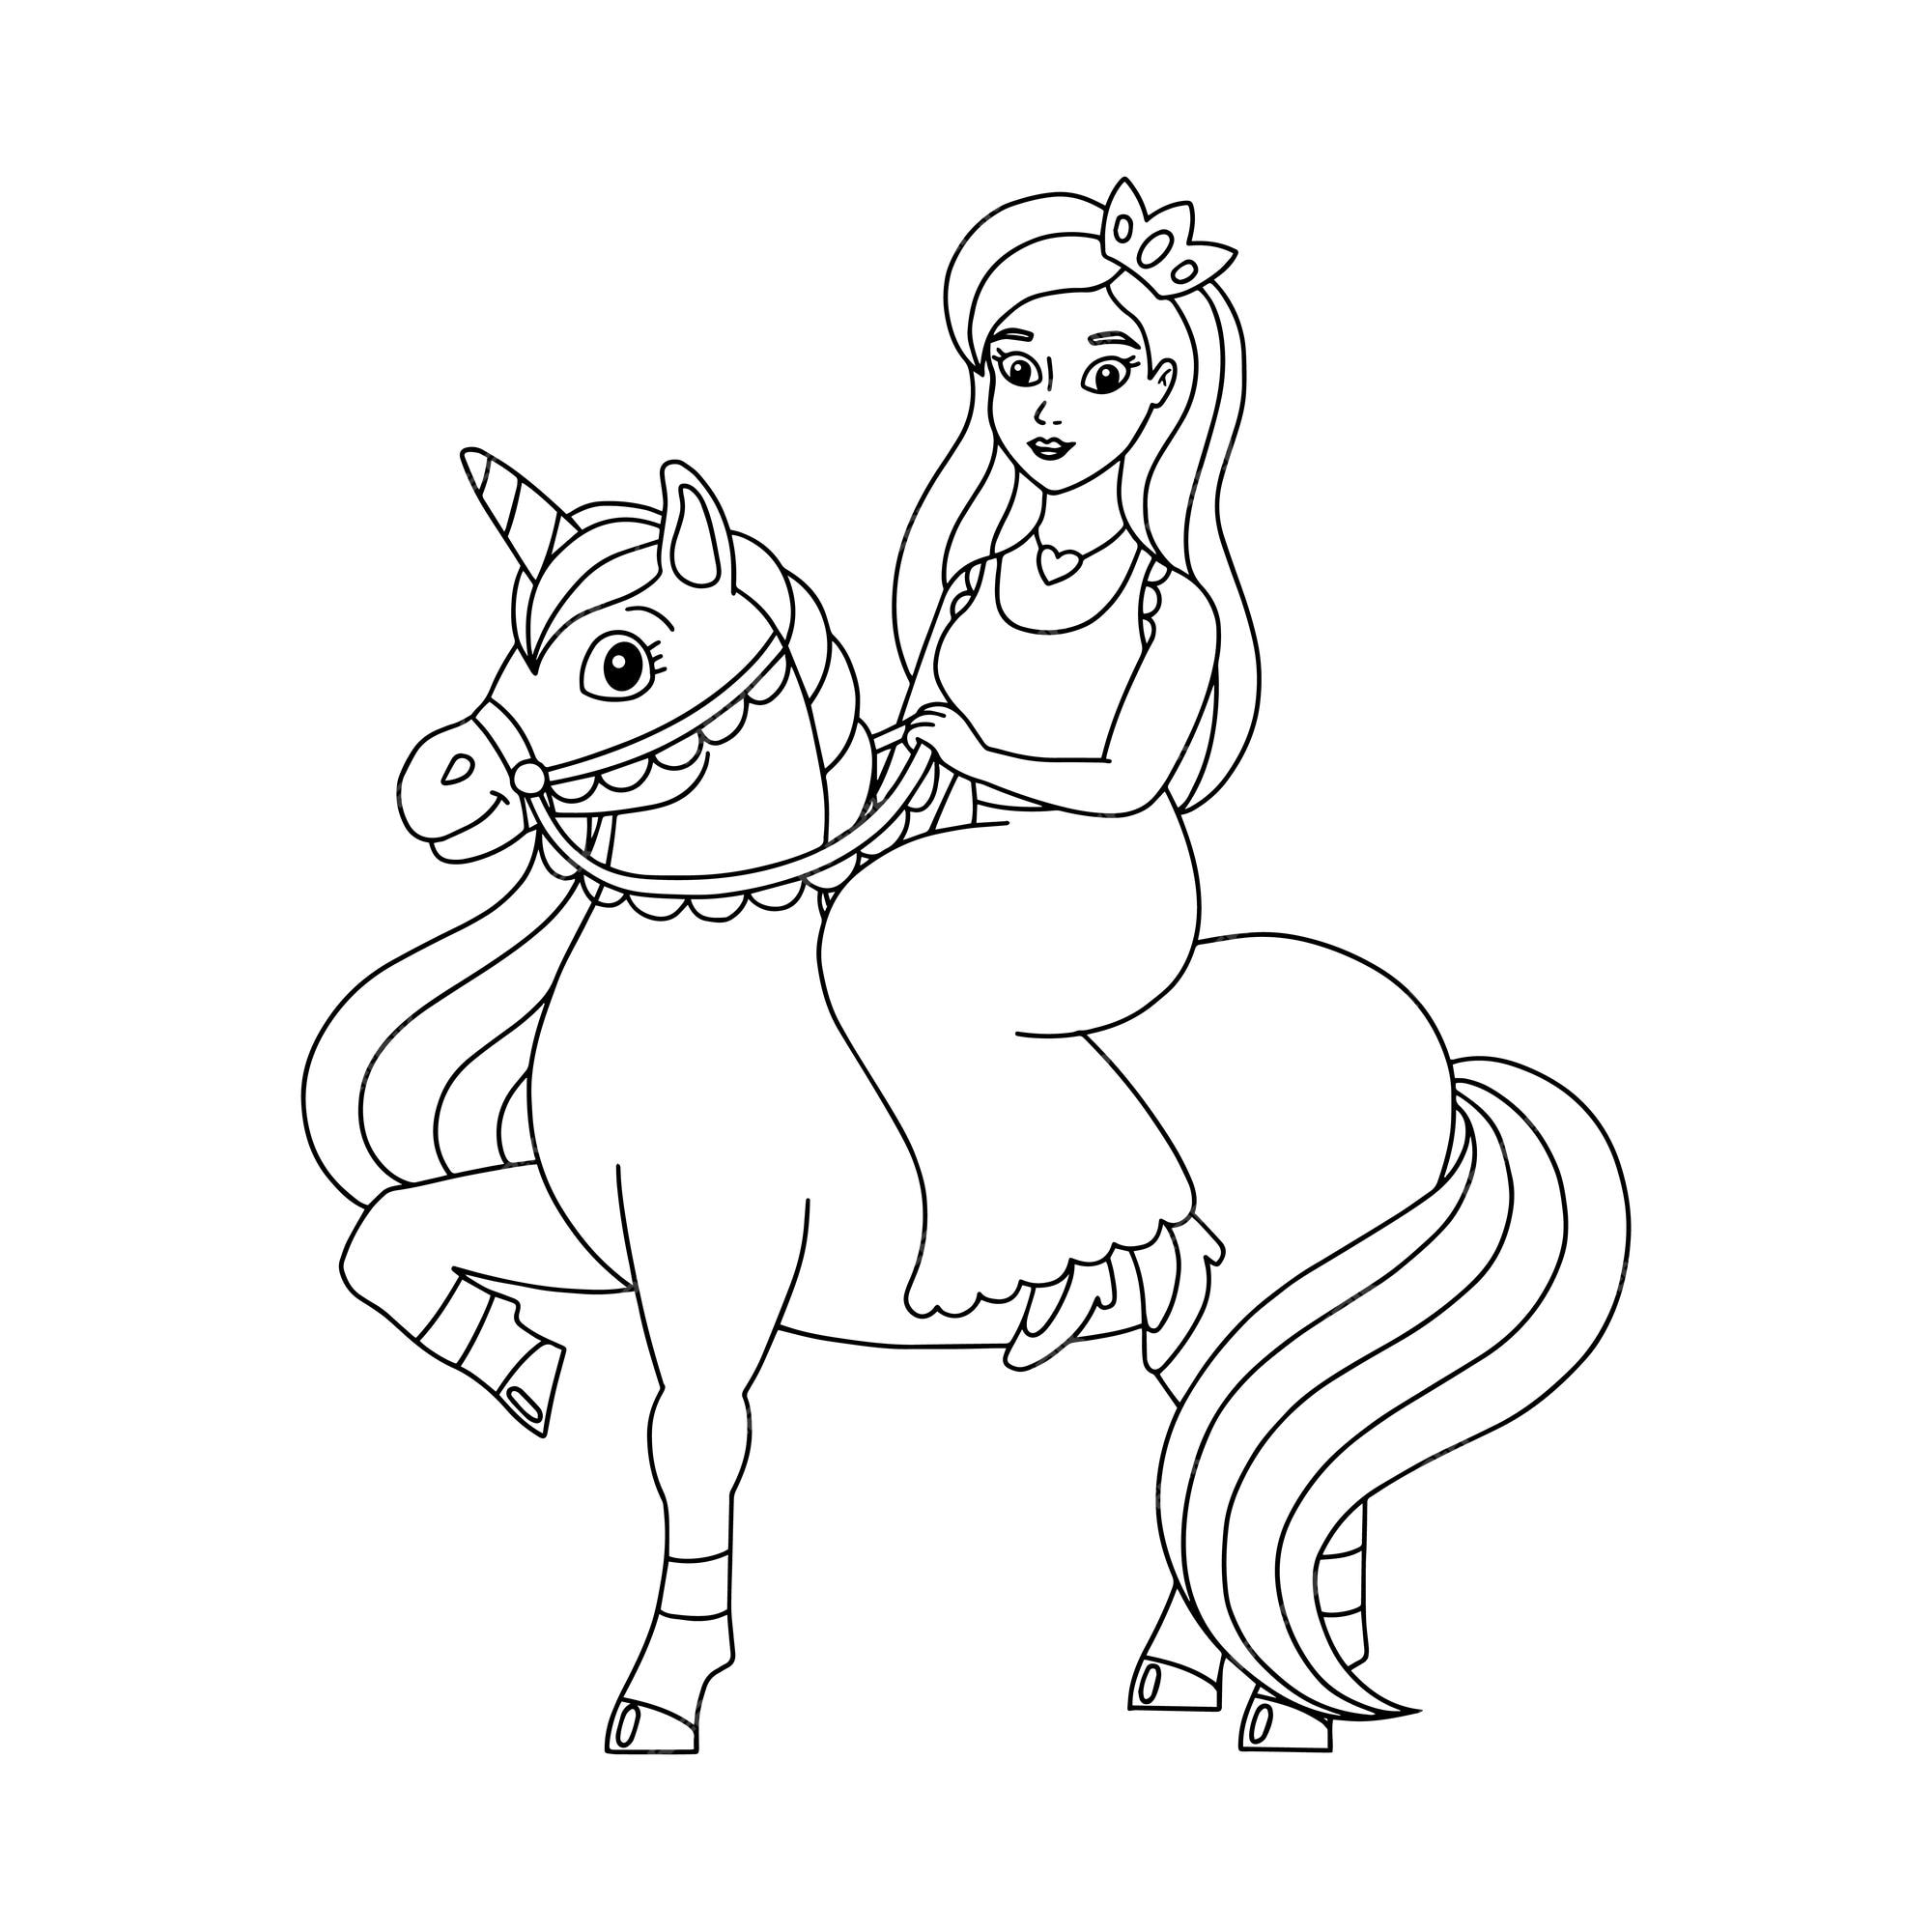 Premium vector the princess is riding a unicorn coloring book page for kids